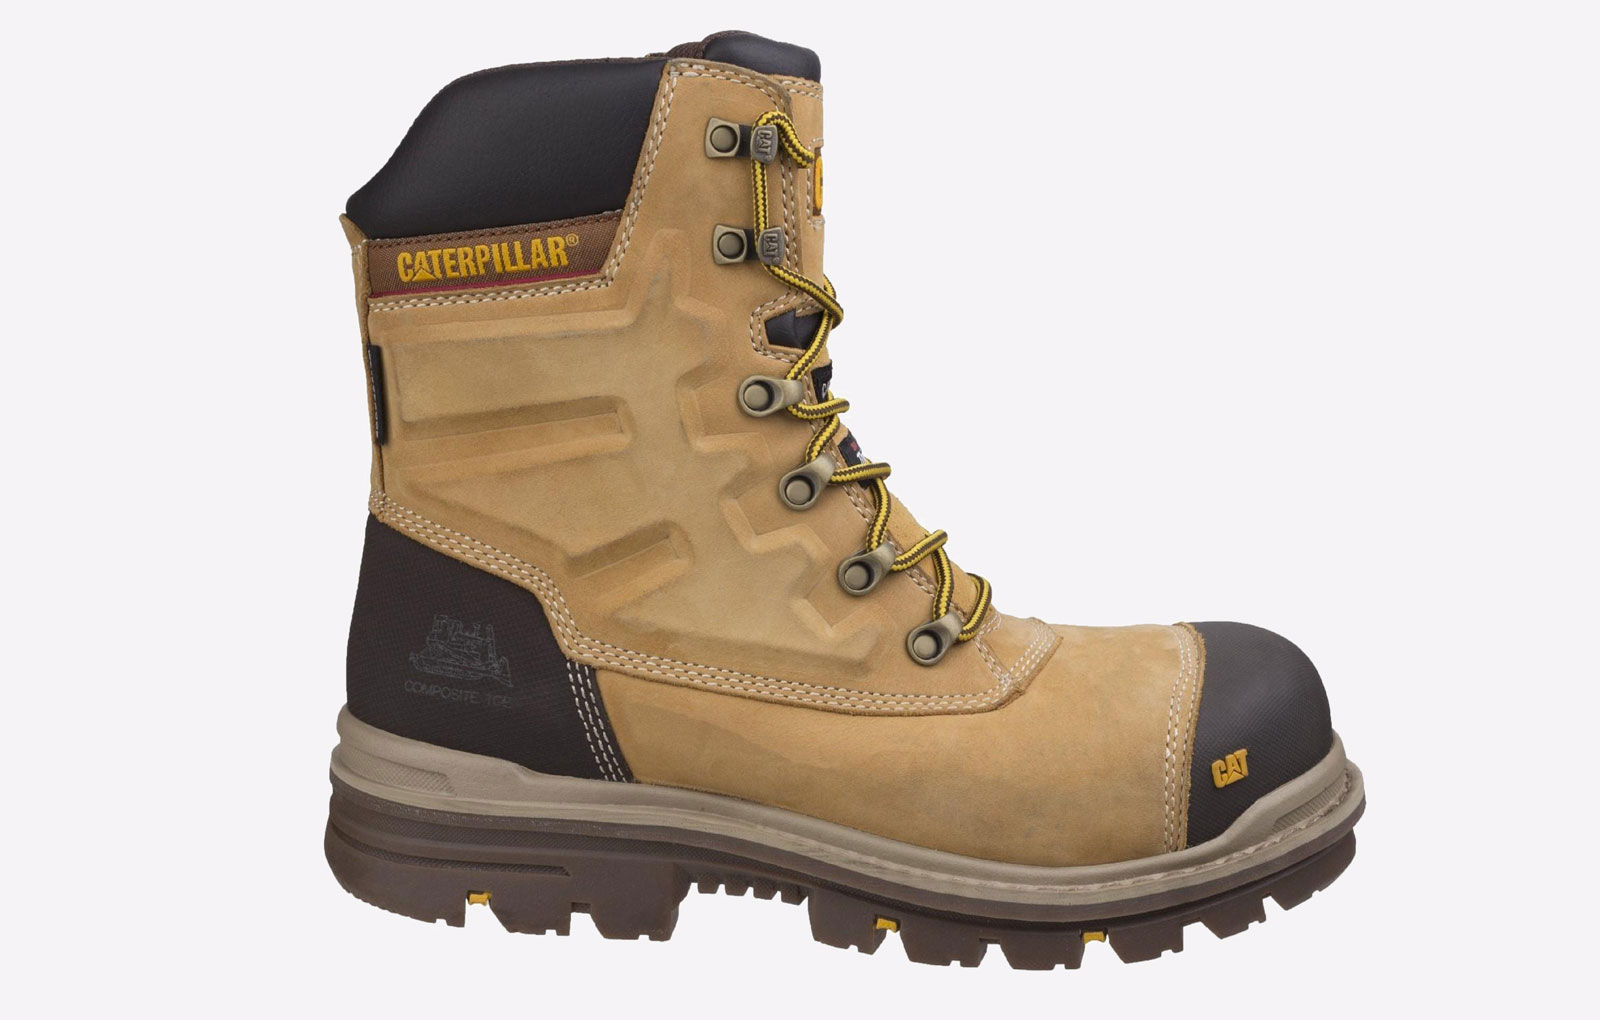 Caterpillar Premier Leather Waterproof Safety Boot Mens - GRD-24528-40566-10